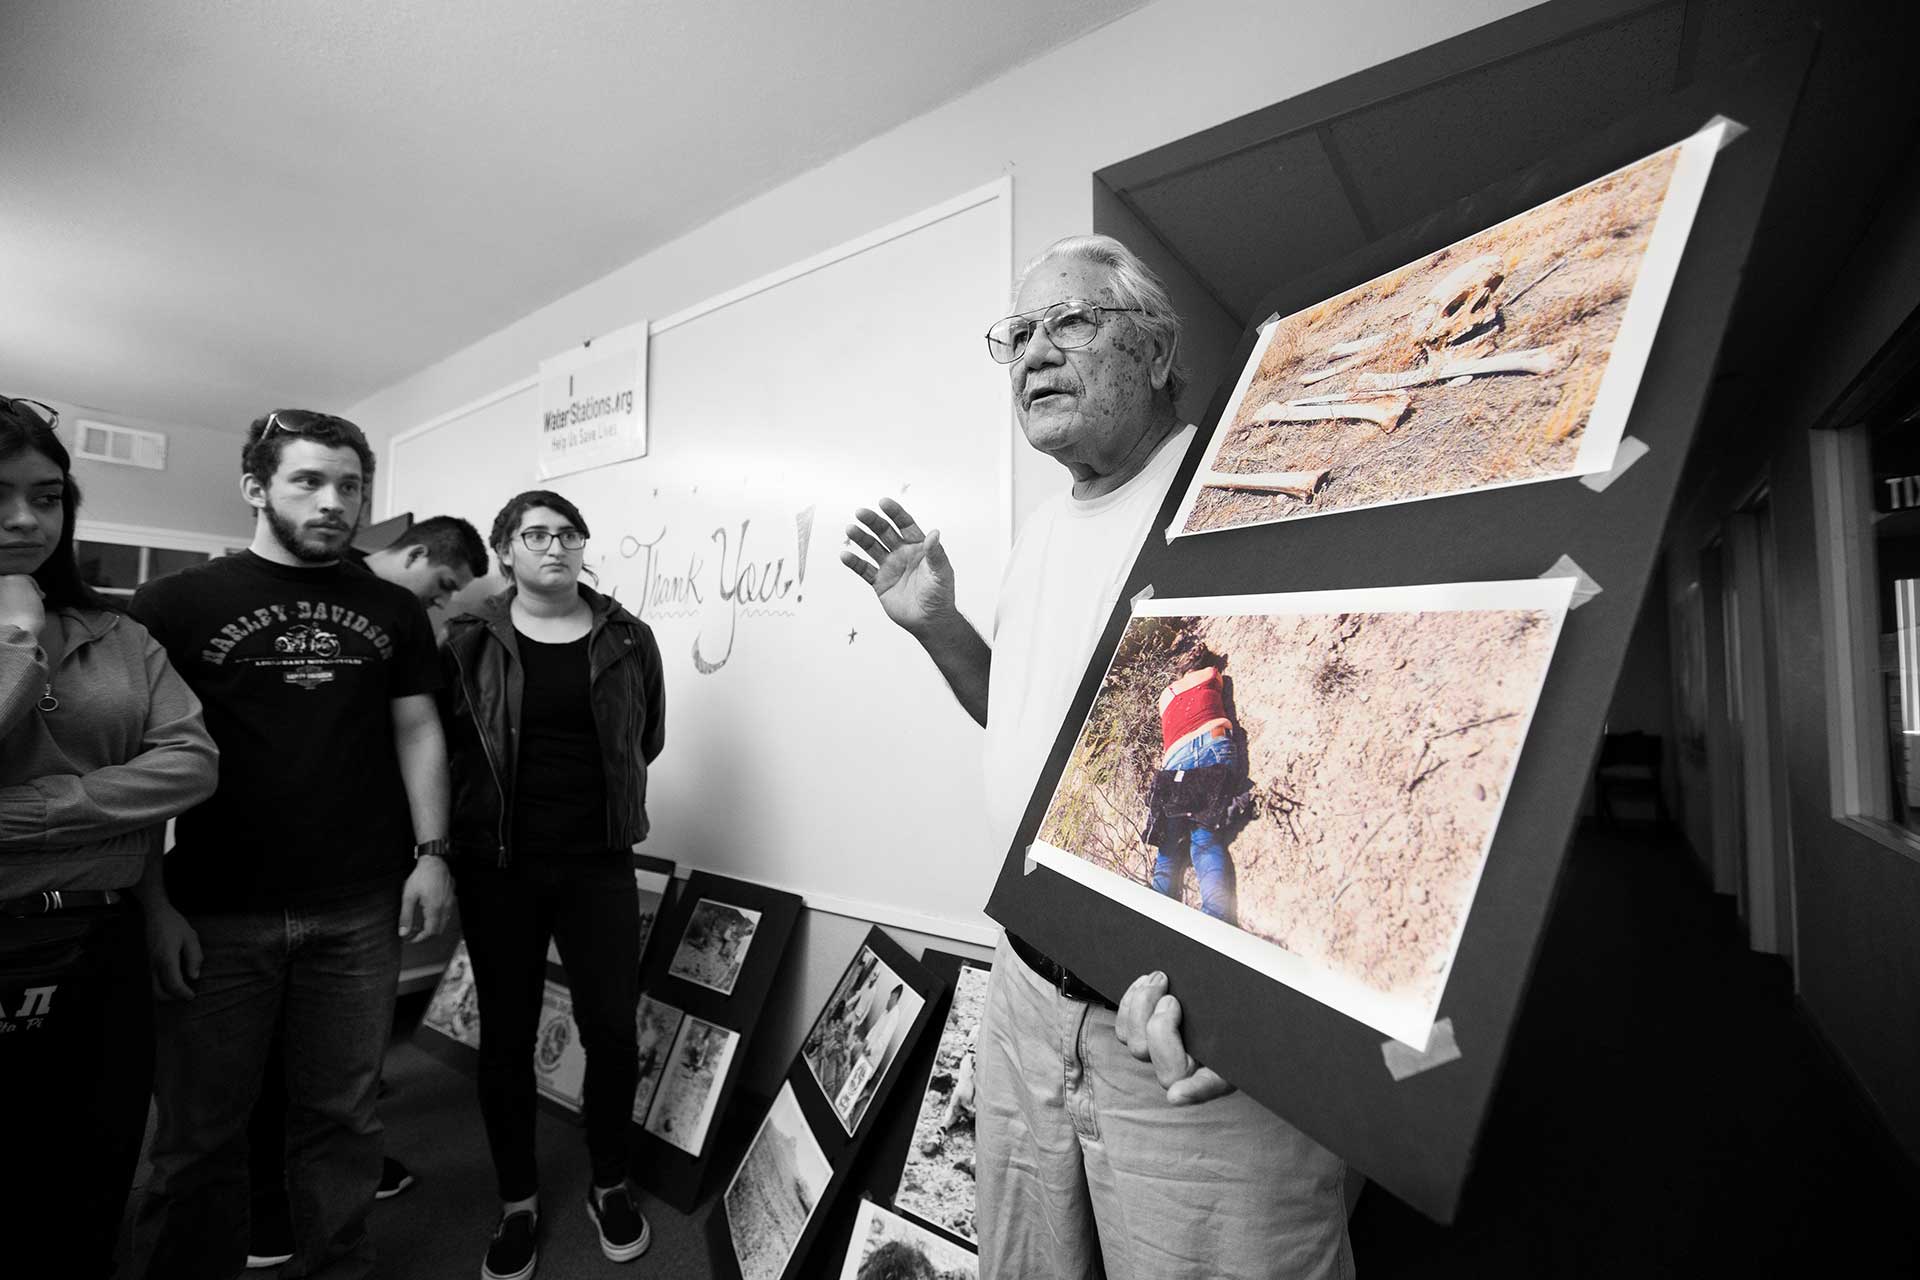 Aguilas del Desierto representative shares photos of bodies with CSUF students.